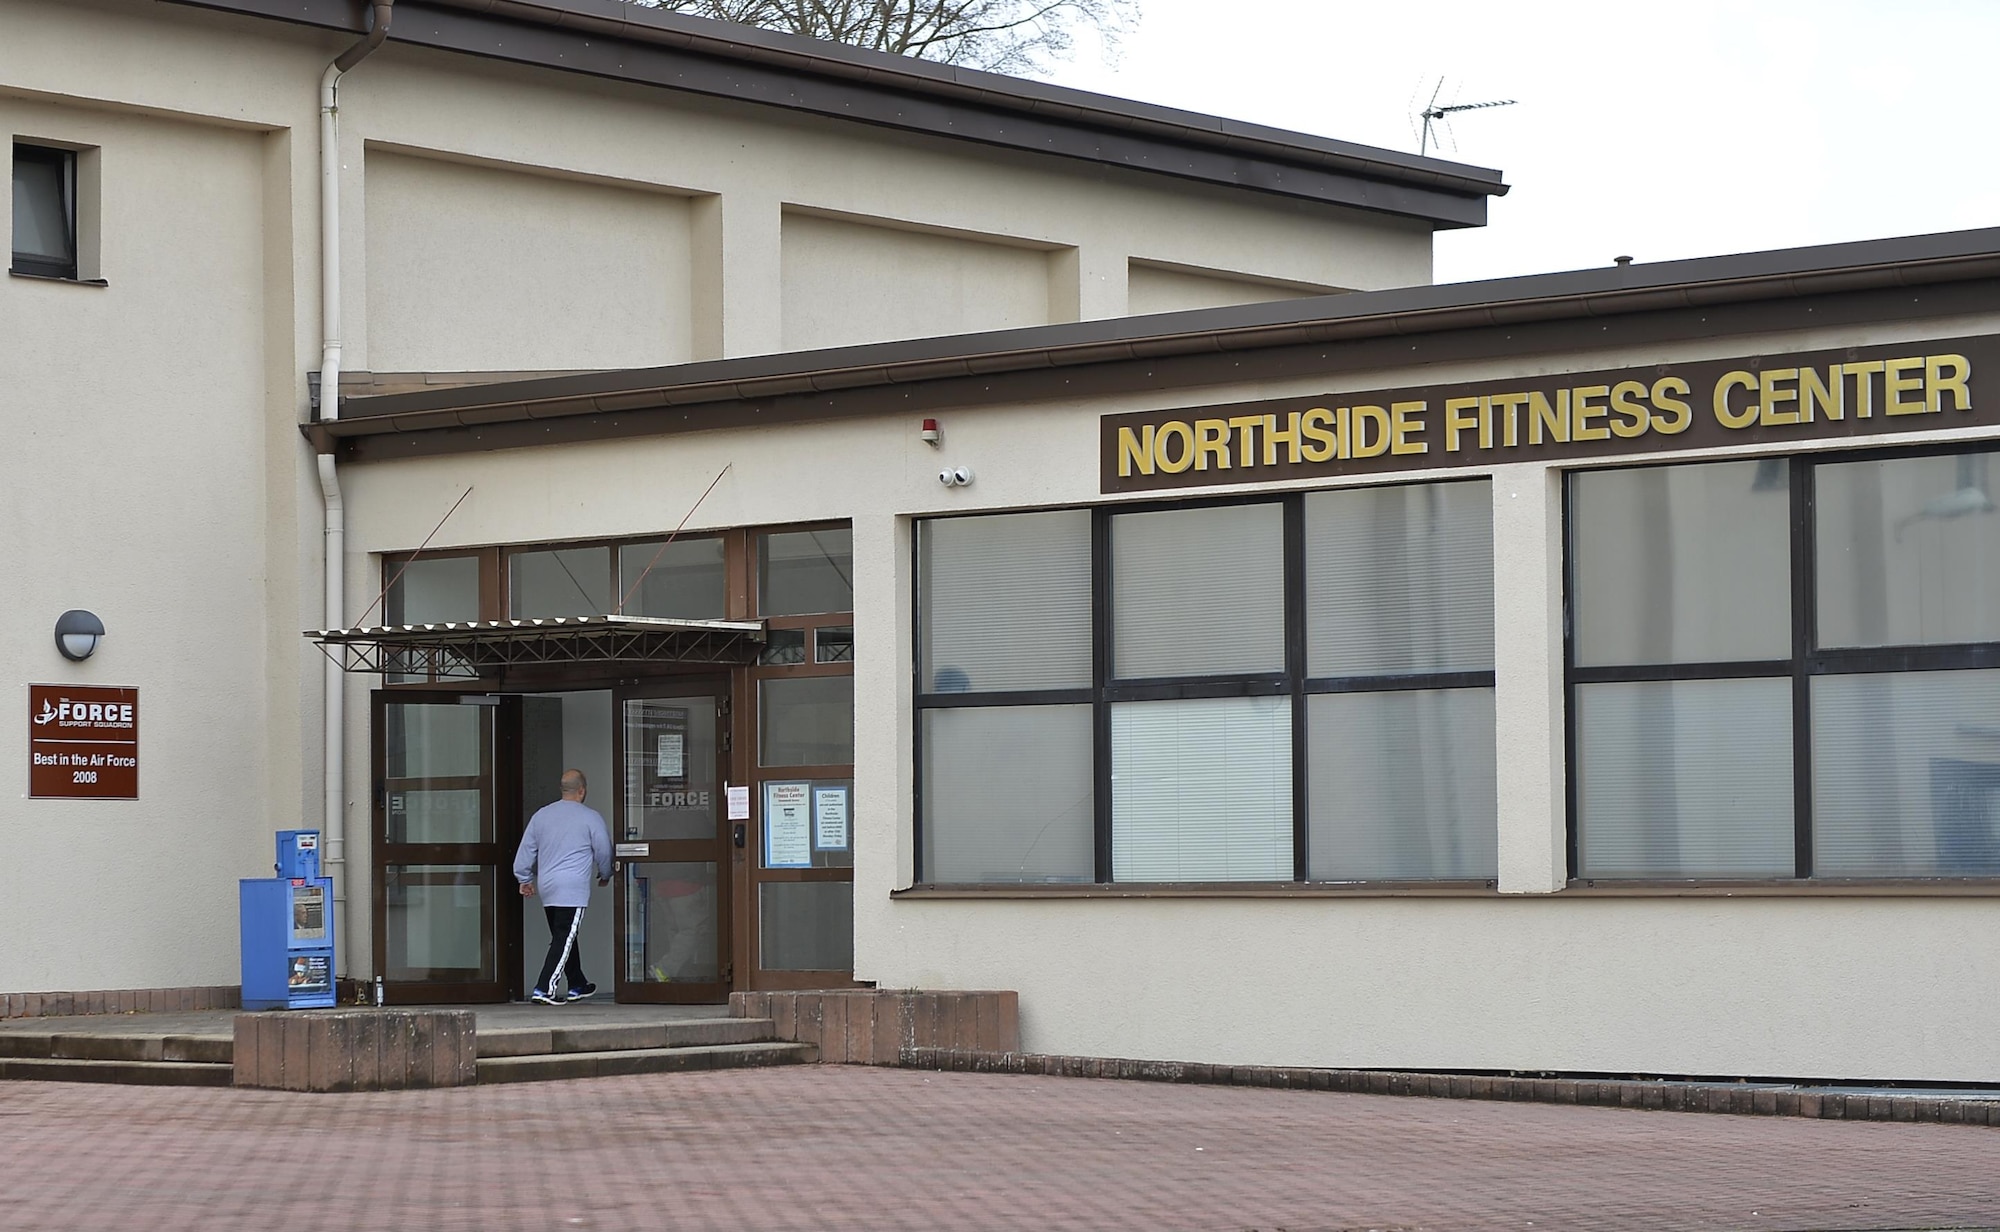 A Patron enters the Northside Fitness Center at Ramstein Air Base, Germany, Jan. 13, 2017. Despite renovations to some of its features, the facility remains open for its customers. (U.S. Air Force photo by Airman 1st Class Joshua Magbanua)